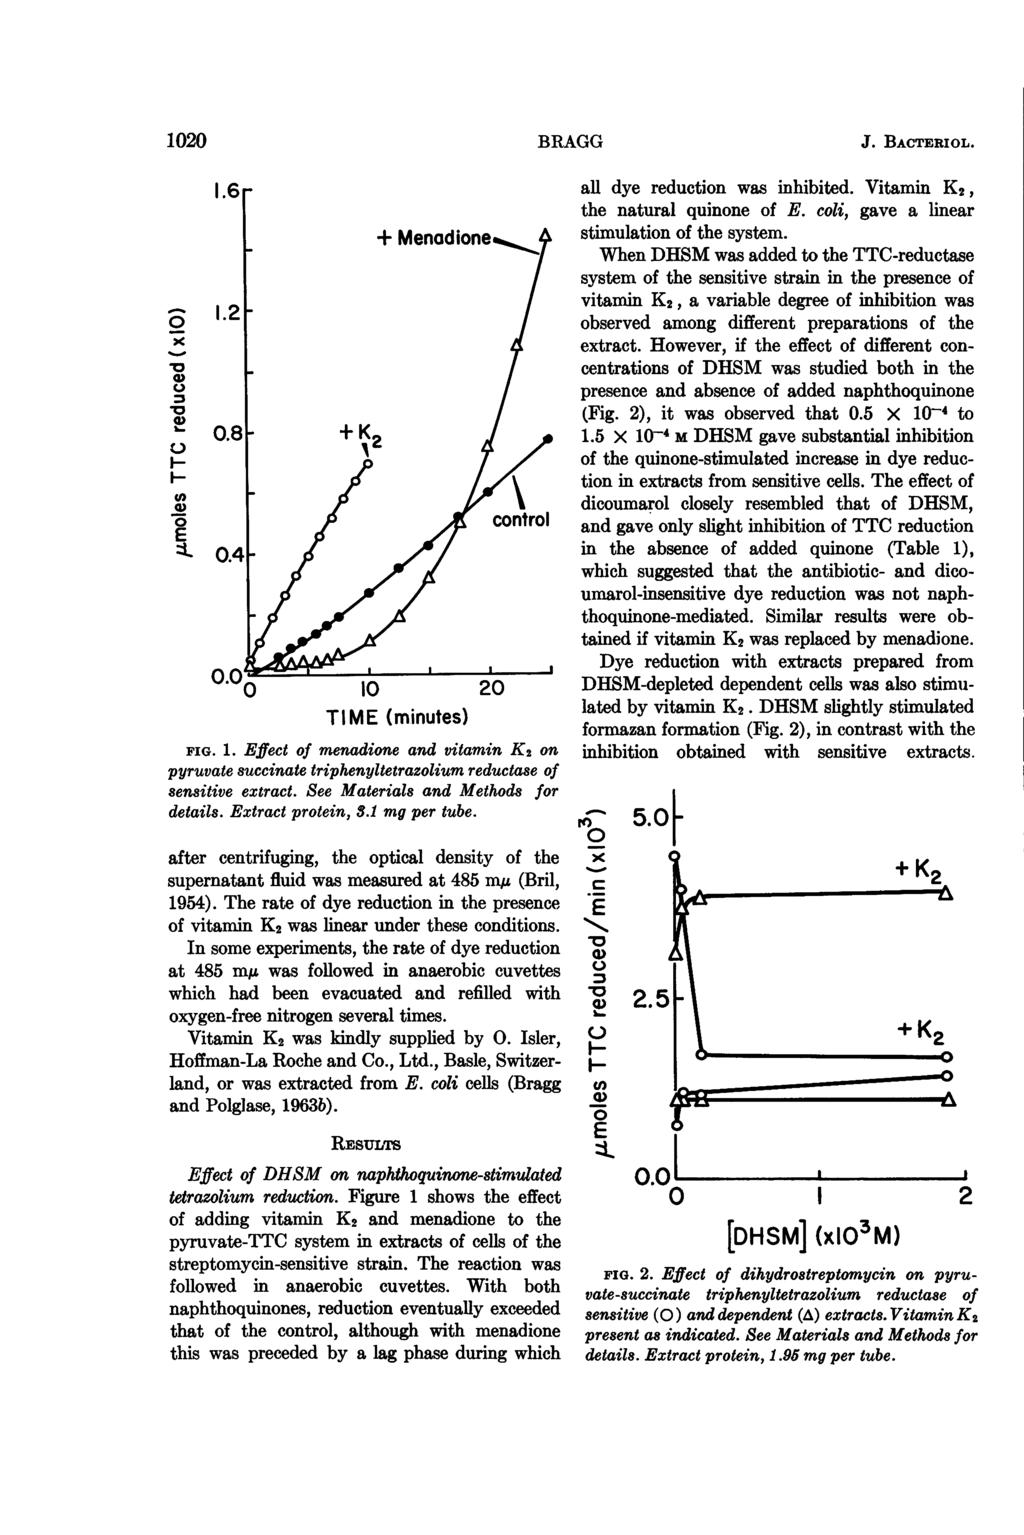 1020 BRAGG O1 1.2 0 0.8 + K V 5 J. BACTERIOL. all dye reduction was inhibited. Vitamin K2, the natural quinone of E. coli, gave a linear stimulation of the system.